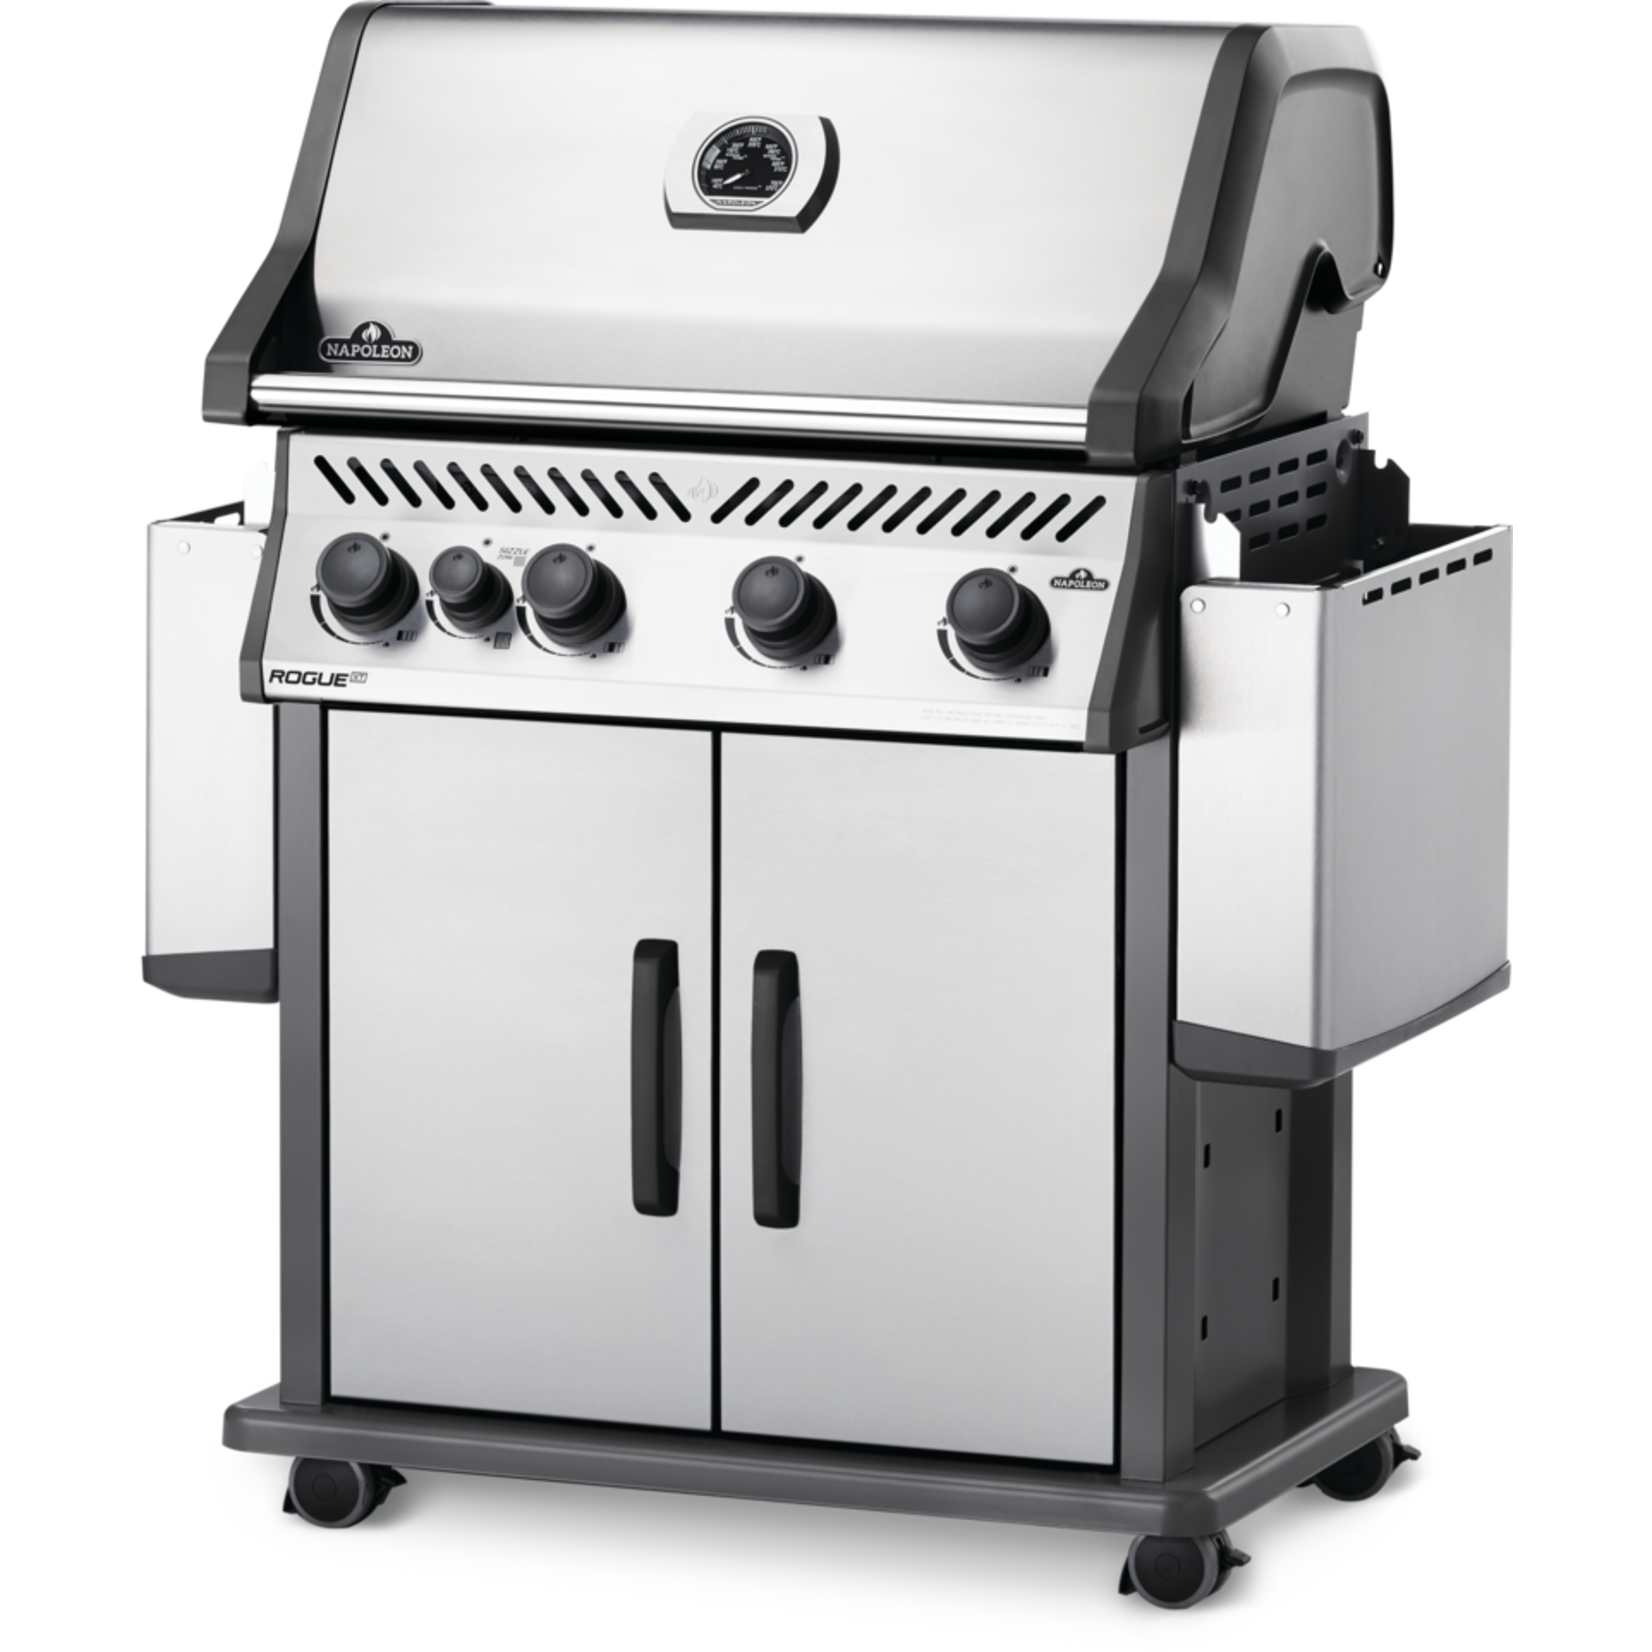 Napoleon Rogue® XT 525 Propane Gas Grill with Infrared Side Burner, Stainless Steel